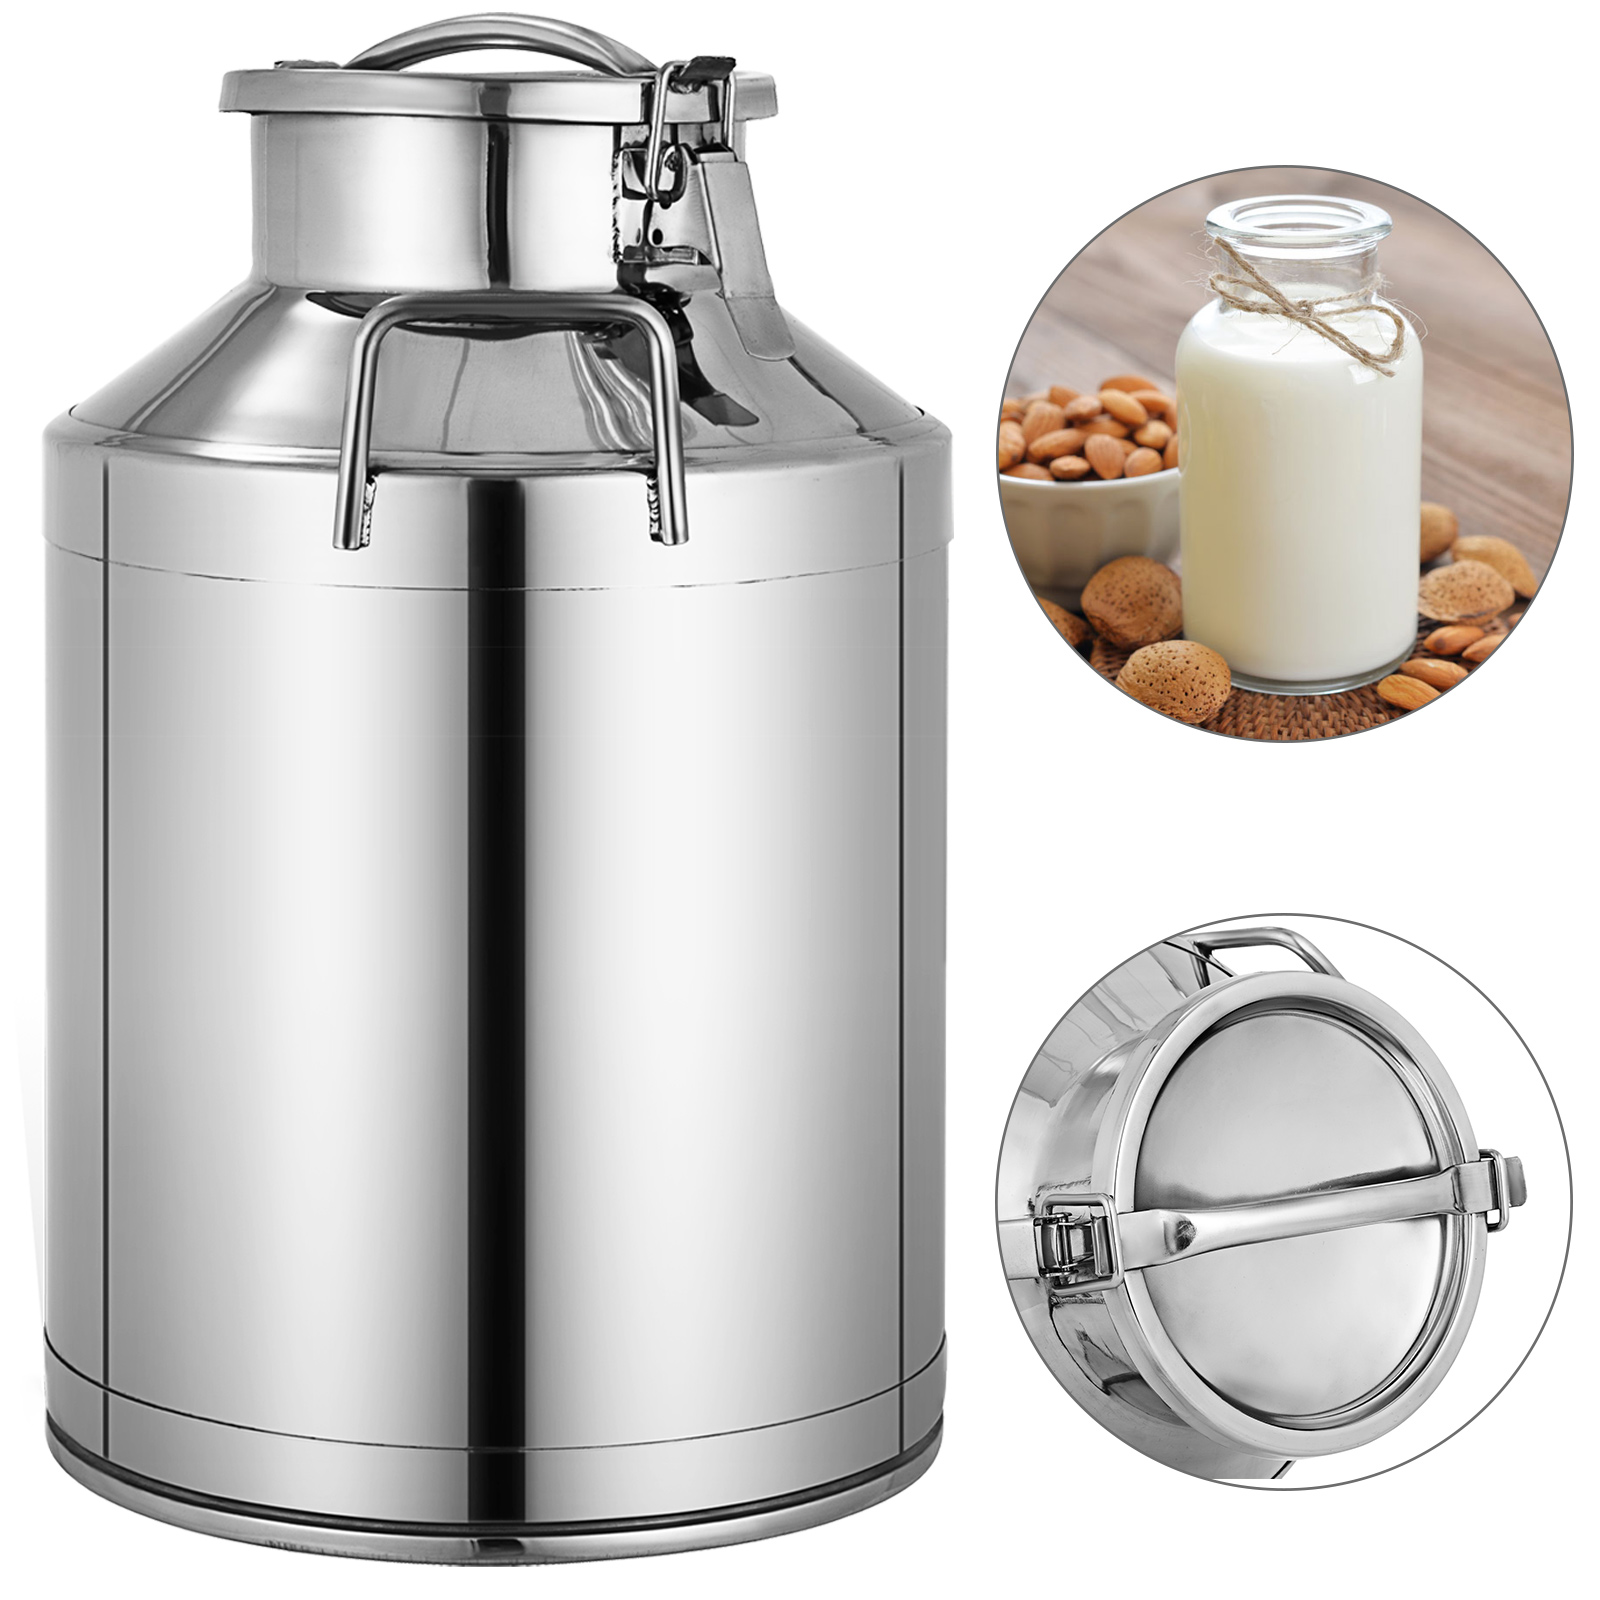 Maple Syrup Transport Cans 30 Liter Stainless Steel Sealed Lid & Optional Spigot 304 Grade 7.9 Gal. , Container Only Milk 